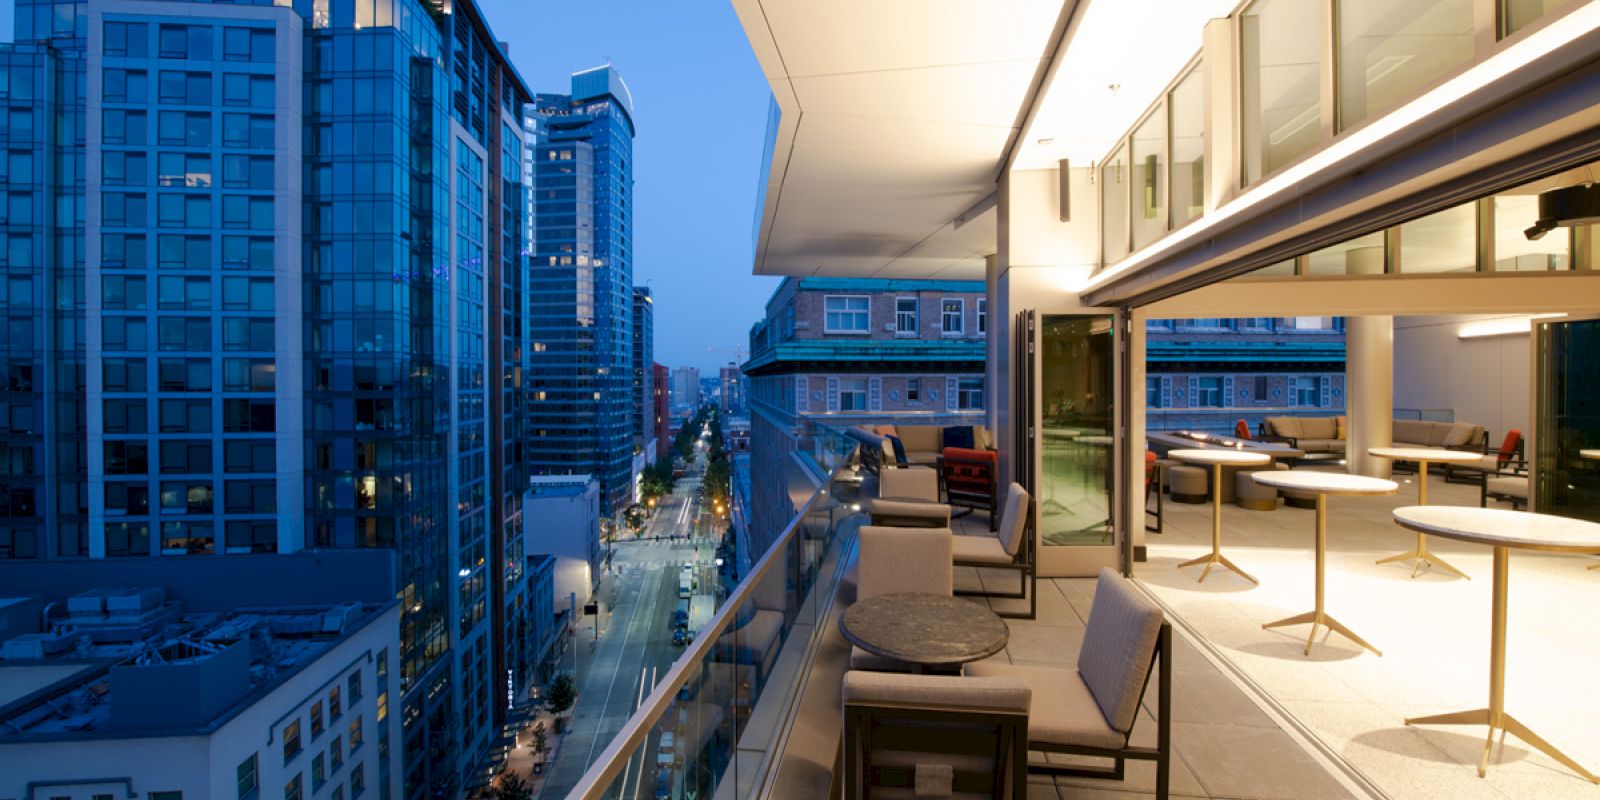 This image shows a modern balcony with tables and chairs overlooking a cityscape at dusk, featuring tall buildings and illuminated streets.